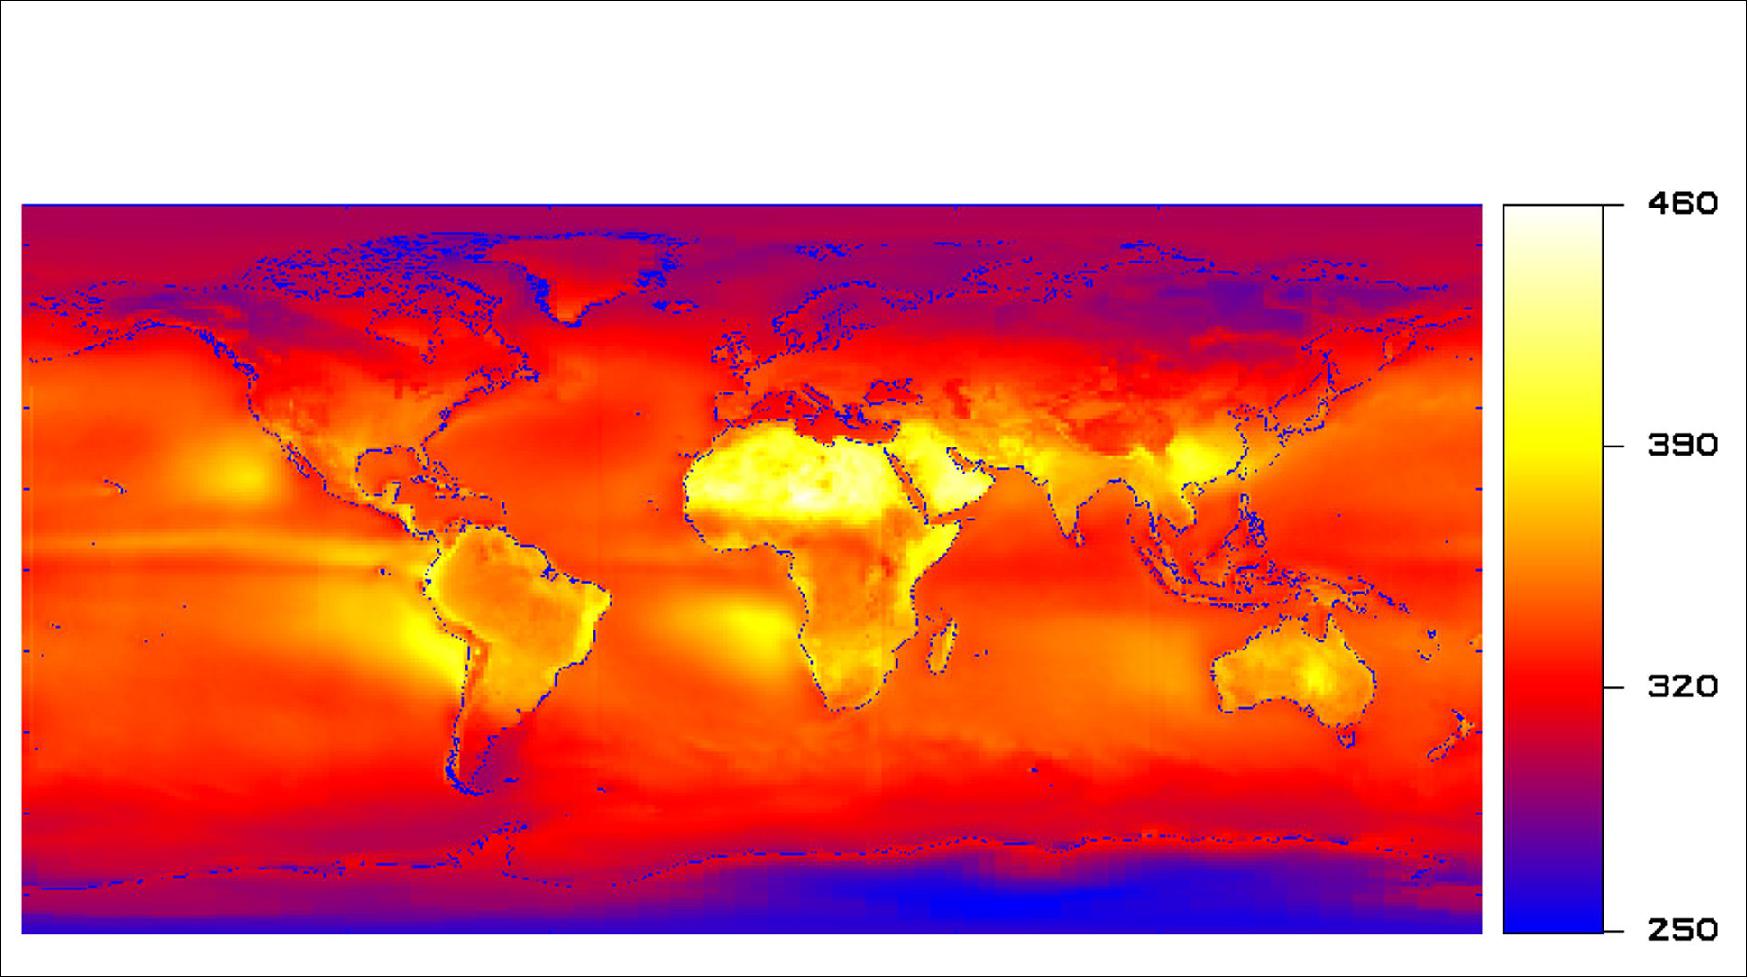 Figure 2: Simba for solar irradiance measurements. Simulated results from the Simba CubeSat mission, which will employ a radiometer to measure solar irradiance levels across Earth's surface to help study meteorology and climate change (image credit: ESA)